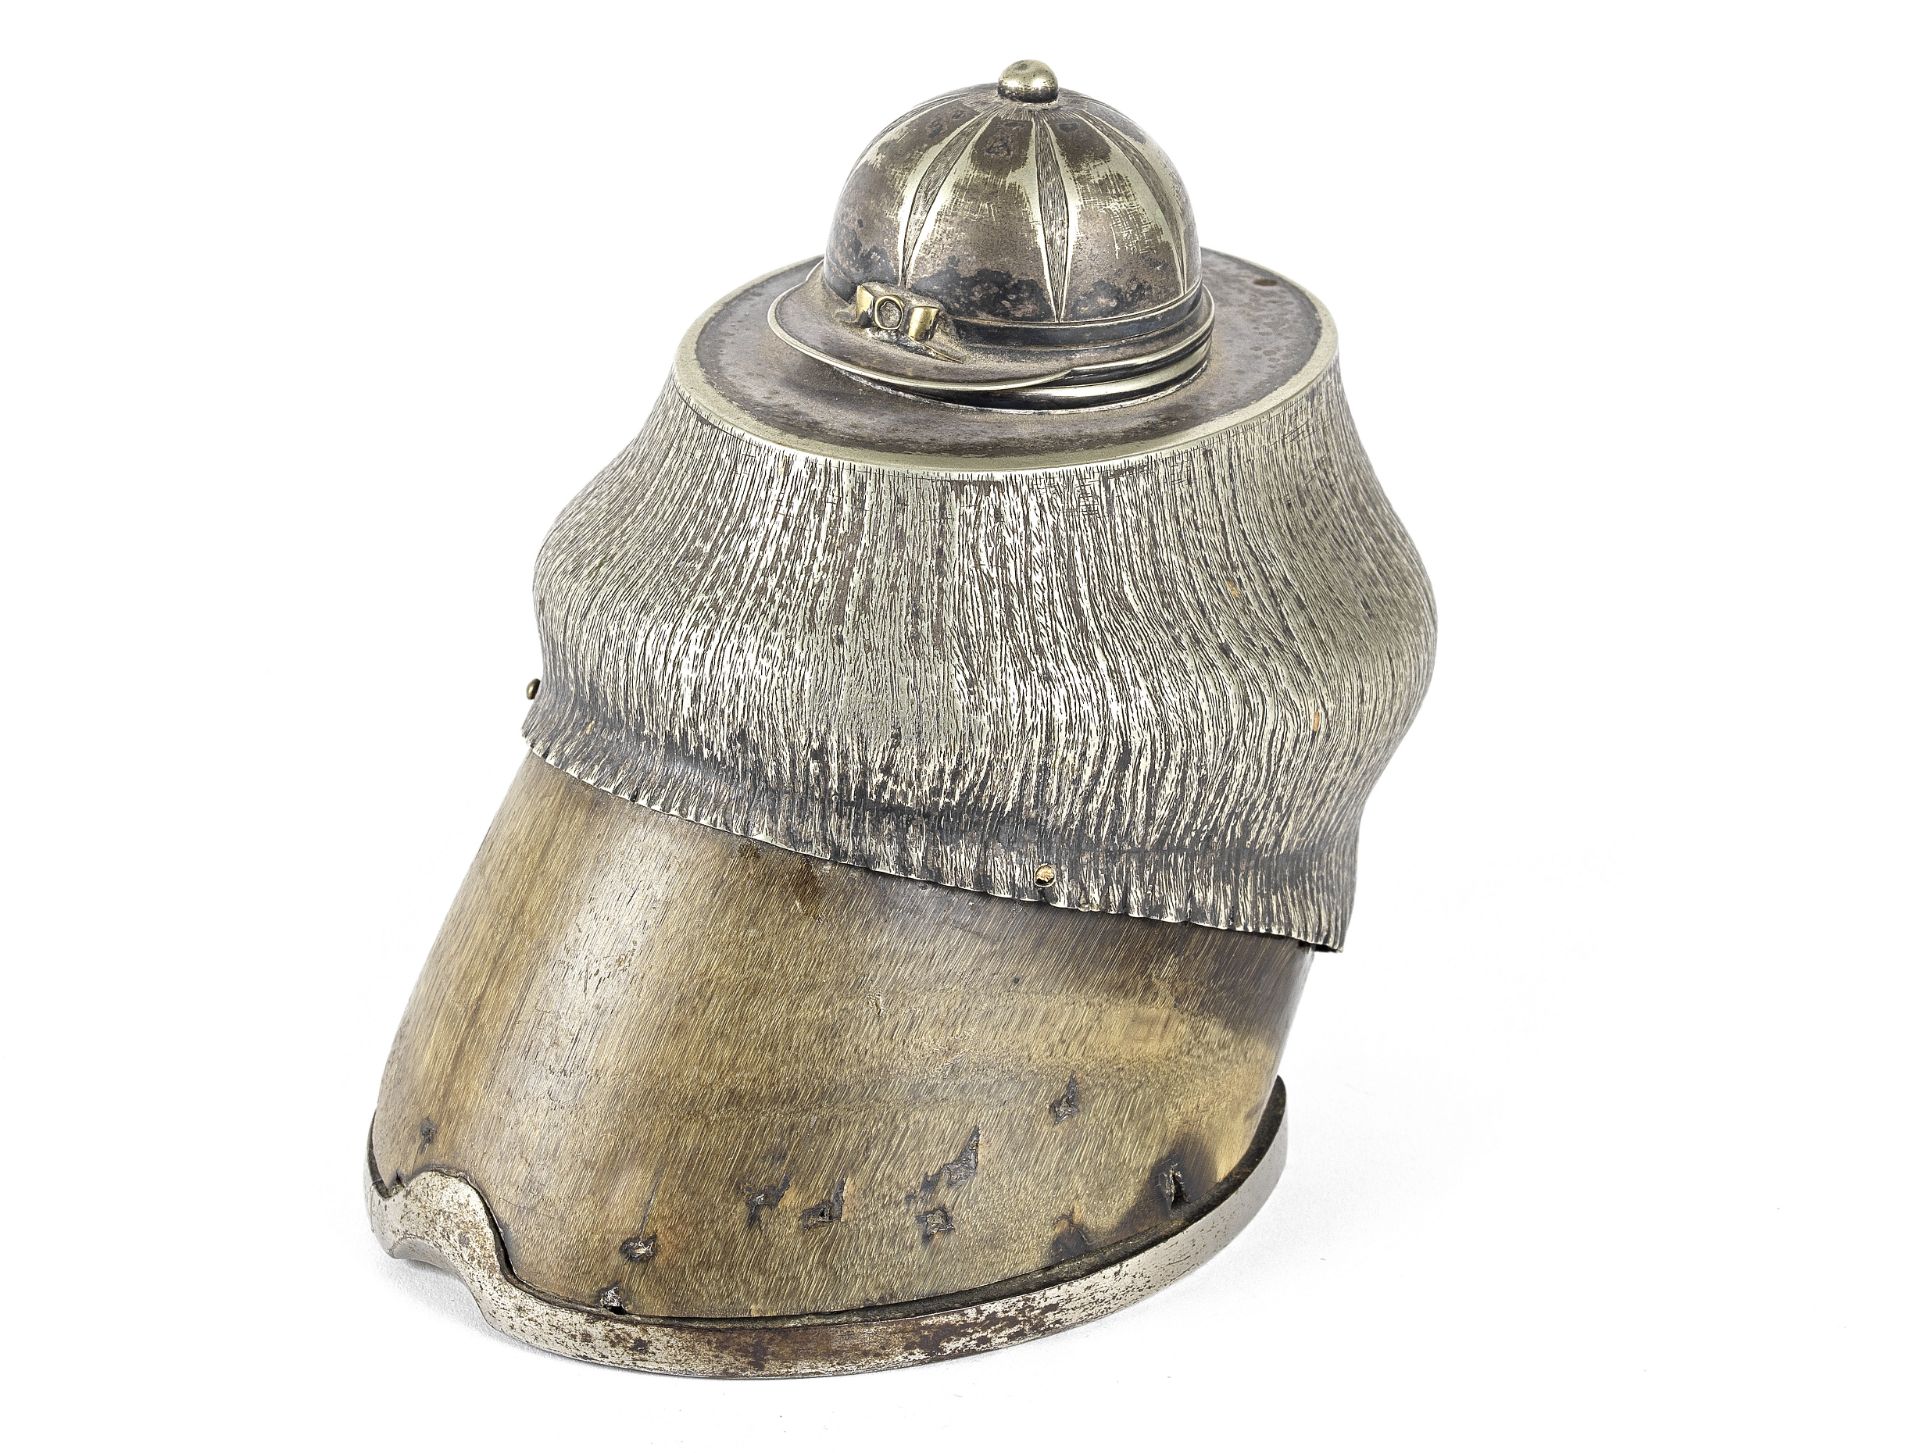 Of Racing interest: A late Victorian electroplated mounted novelty horse's hoof and jockey's cap...